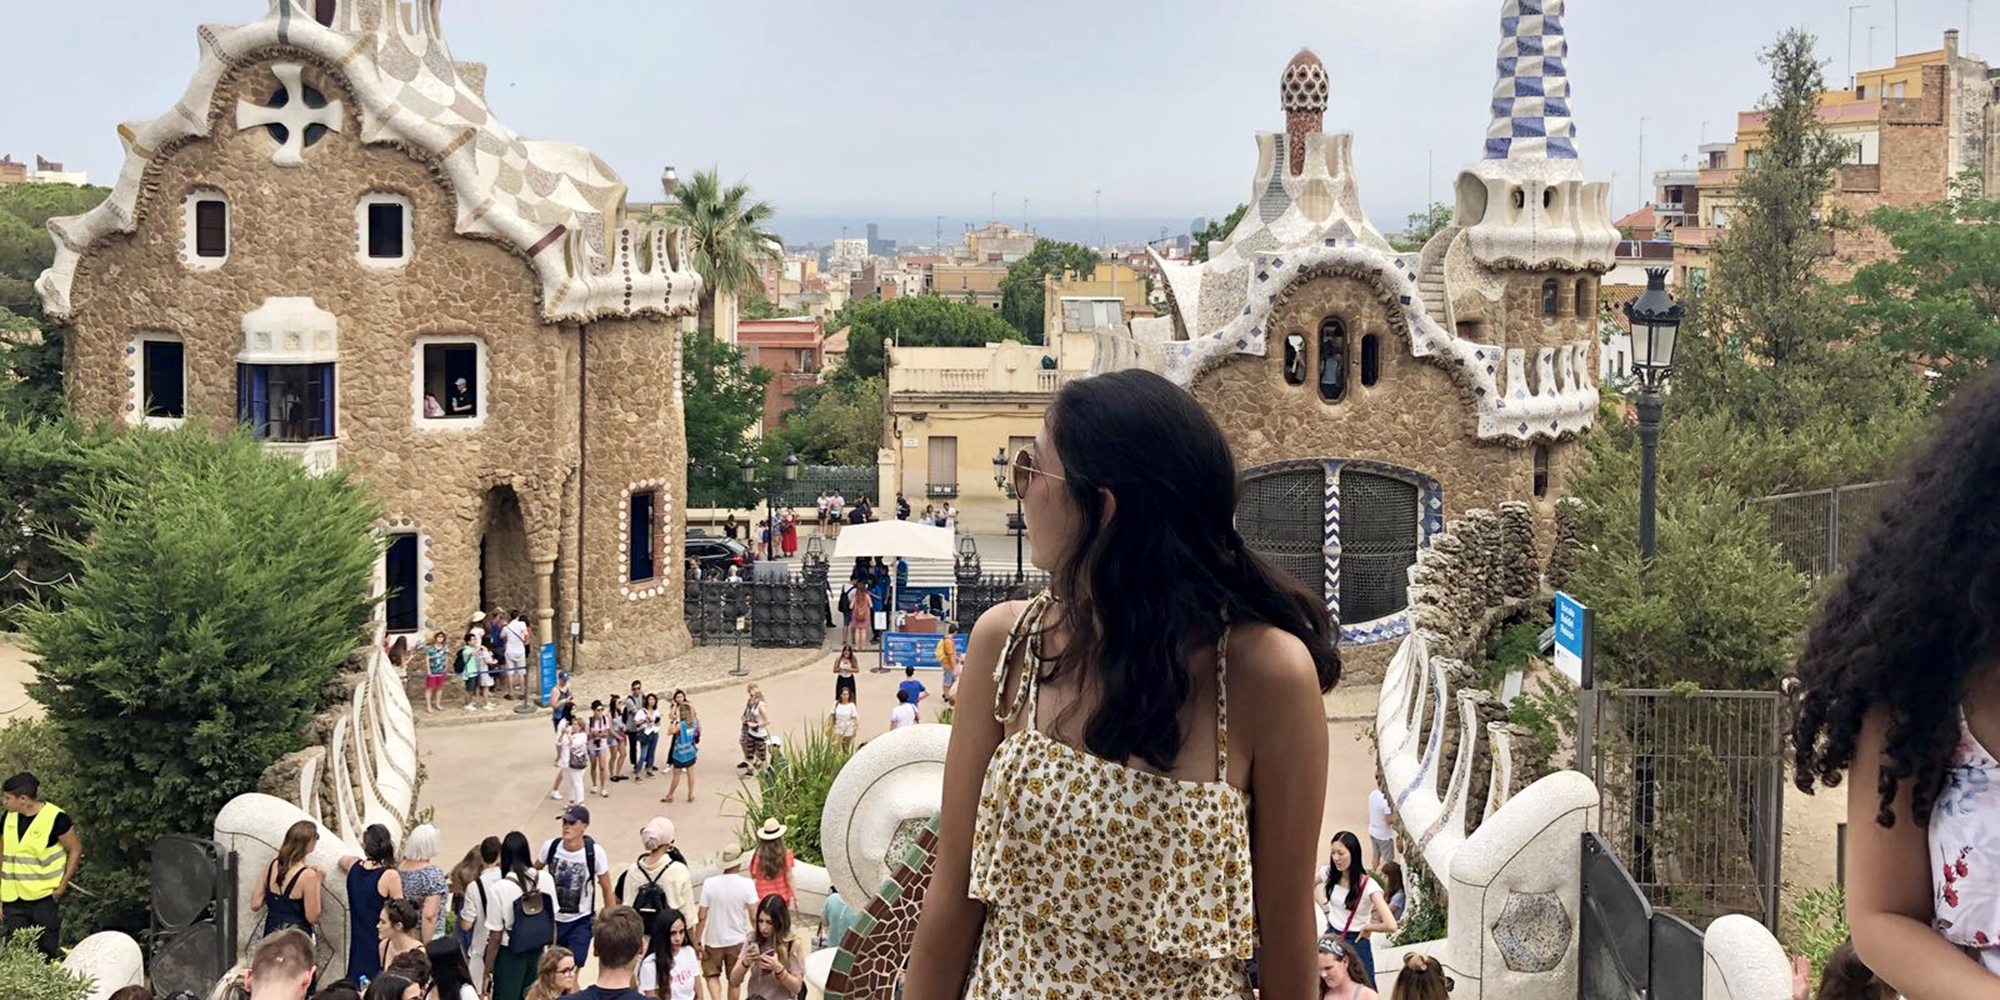 Dietrich student studying abroad in Barcelona.